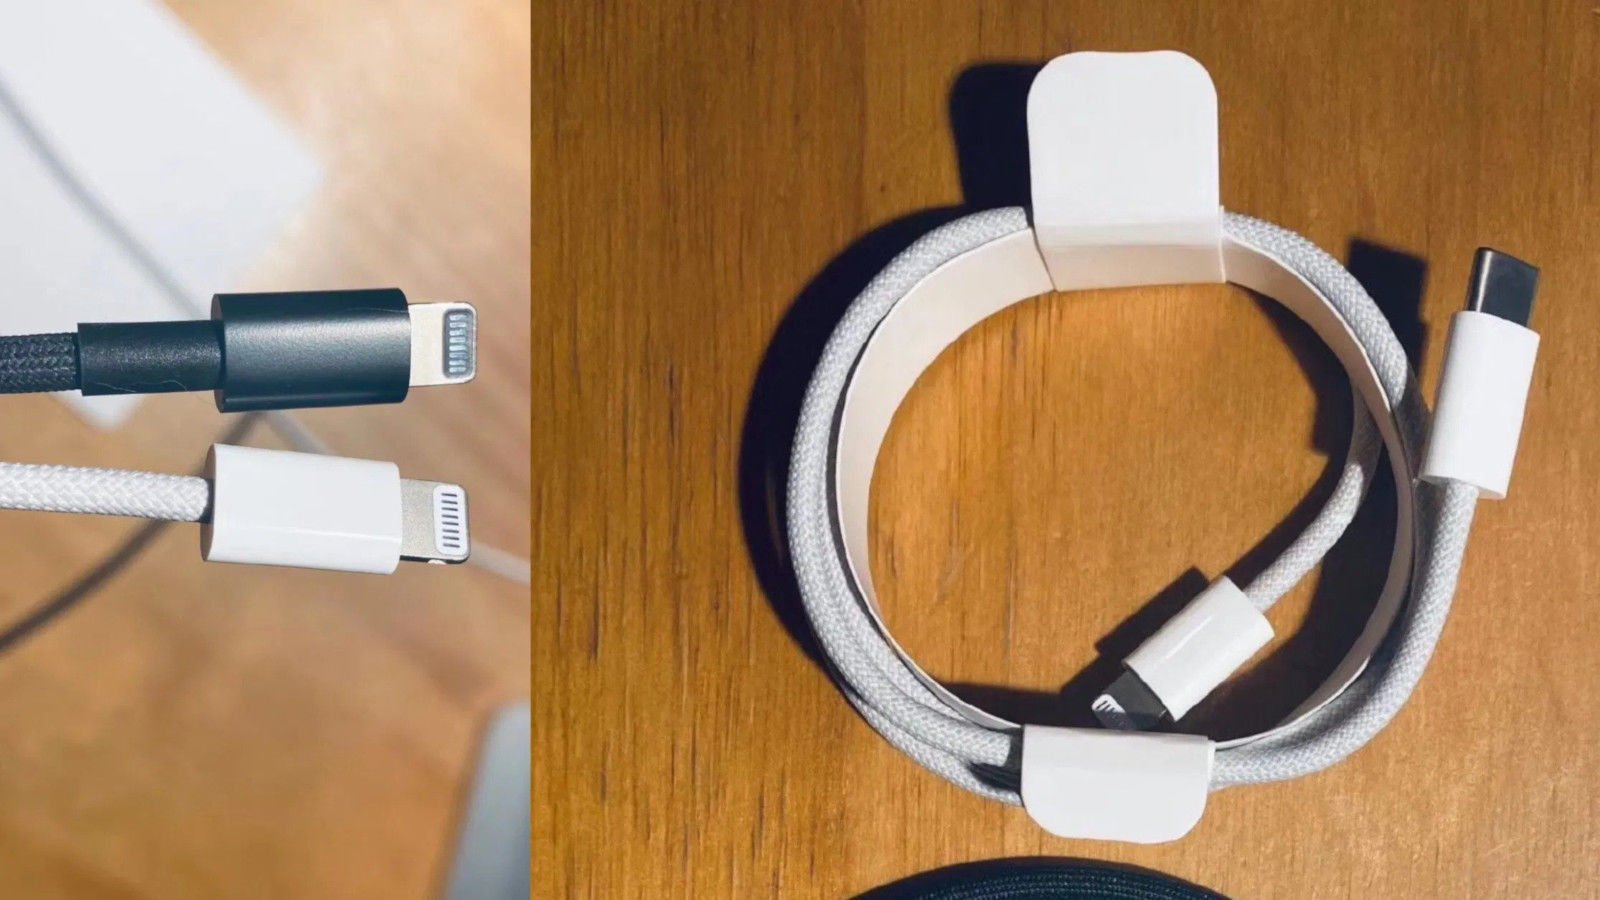 New iPhone 12 release date, price & specs: White and black Lightning cables